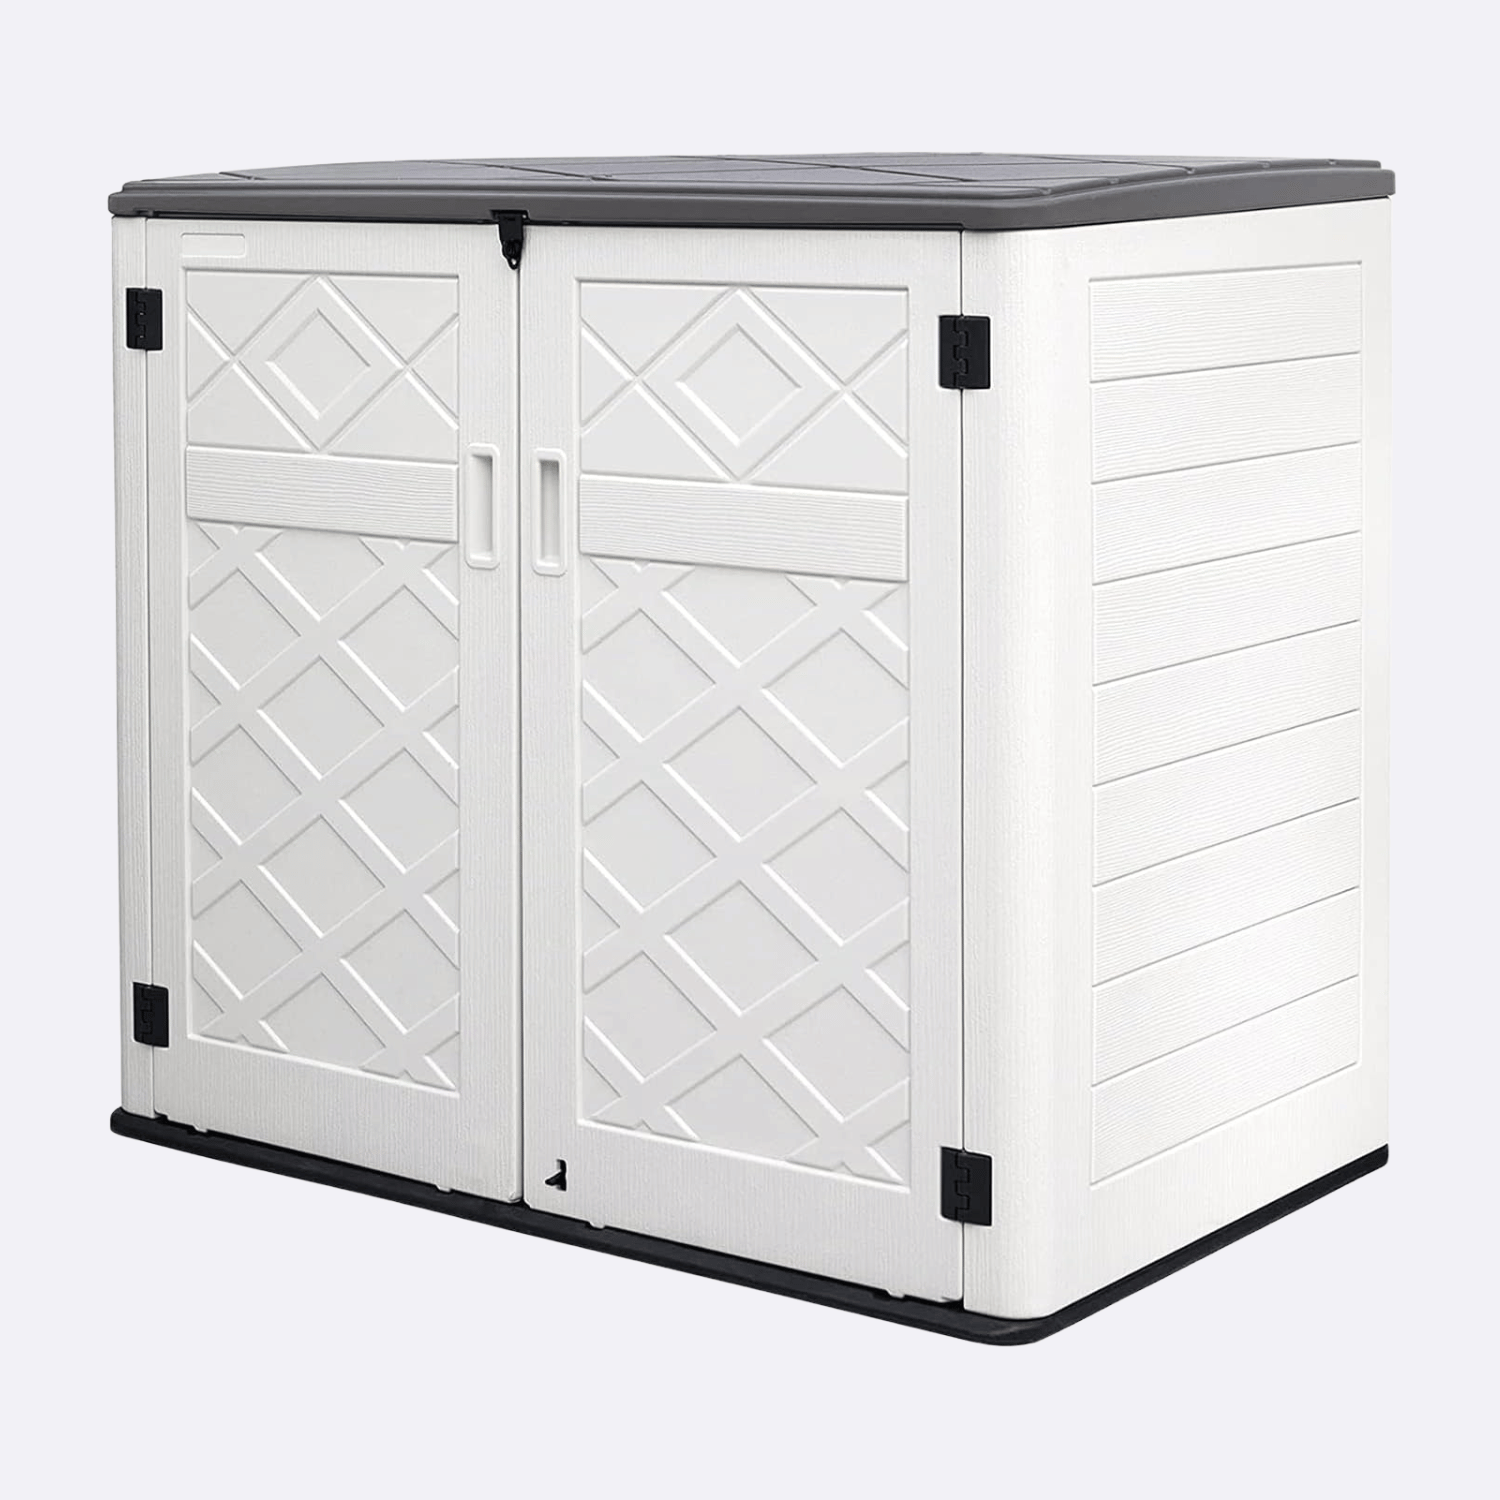 Horti Cubic 38 cu. ft. Outdoor Horizontal Storage Shed - Horti Cubic